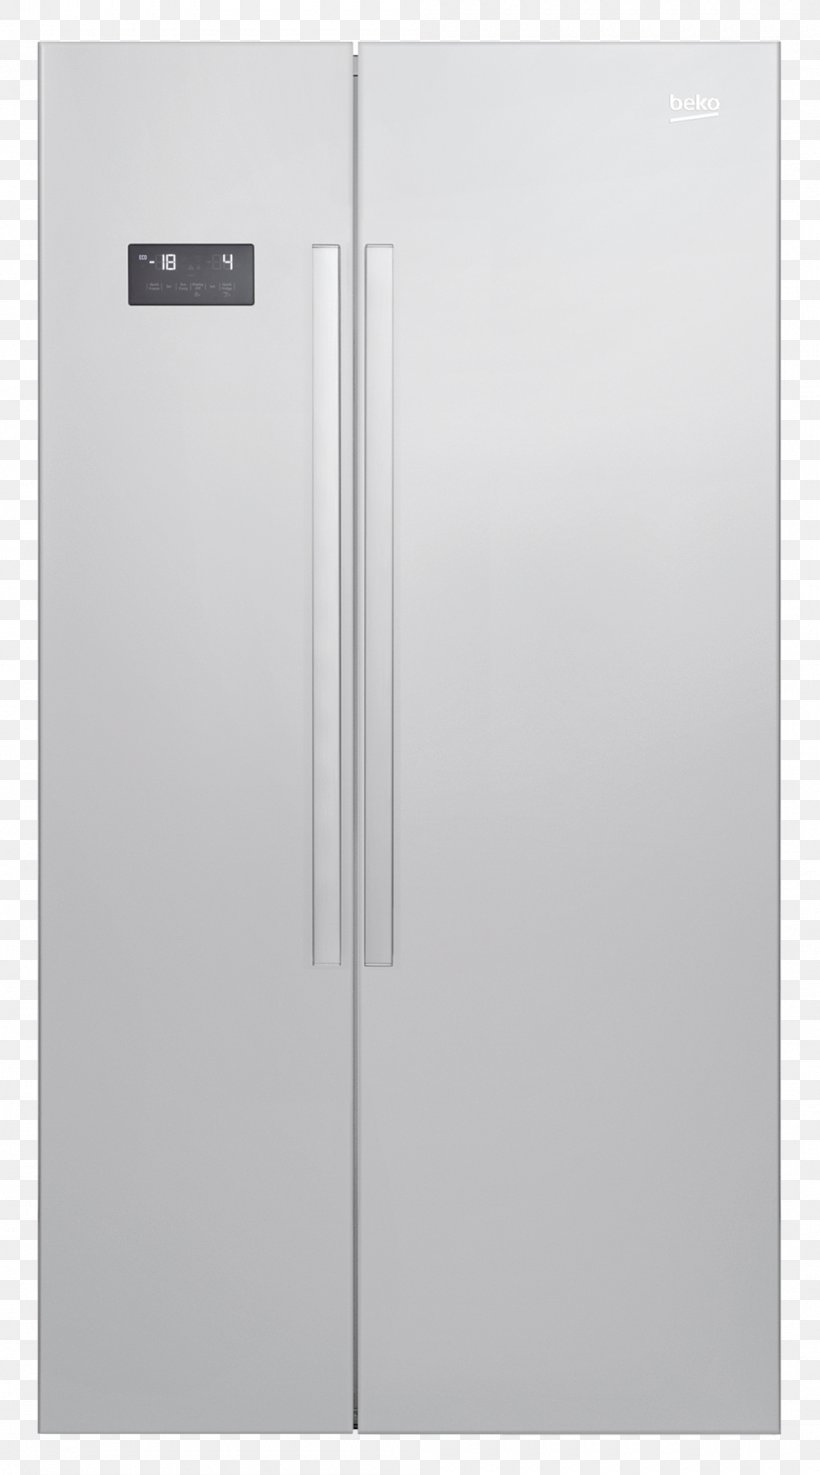 Refrigerator Beko Auto-defrost Freezers Major Appliance, PNG, 1000x1799px, Refrigerator, Air Conditioning, Autodefrost, Beko, Freezers Download Free